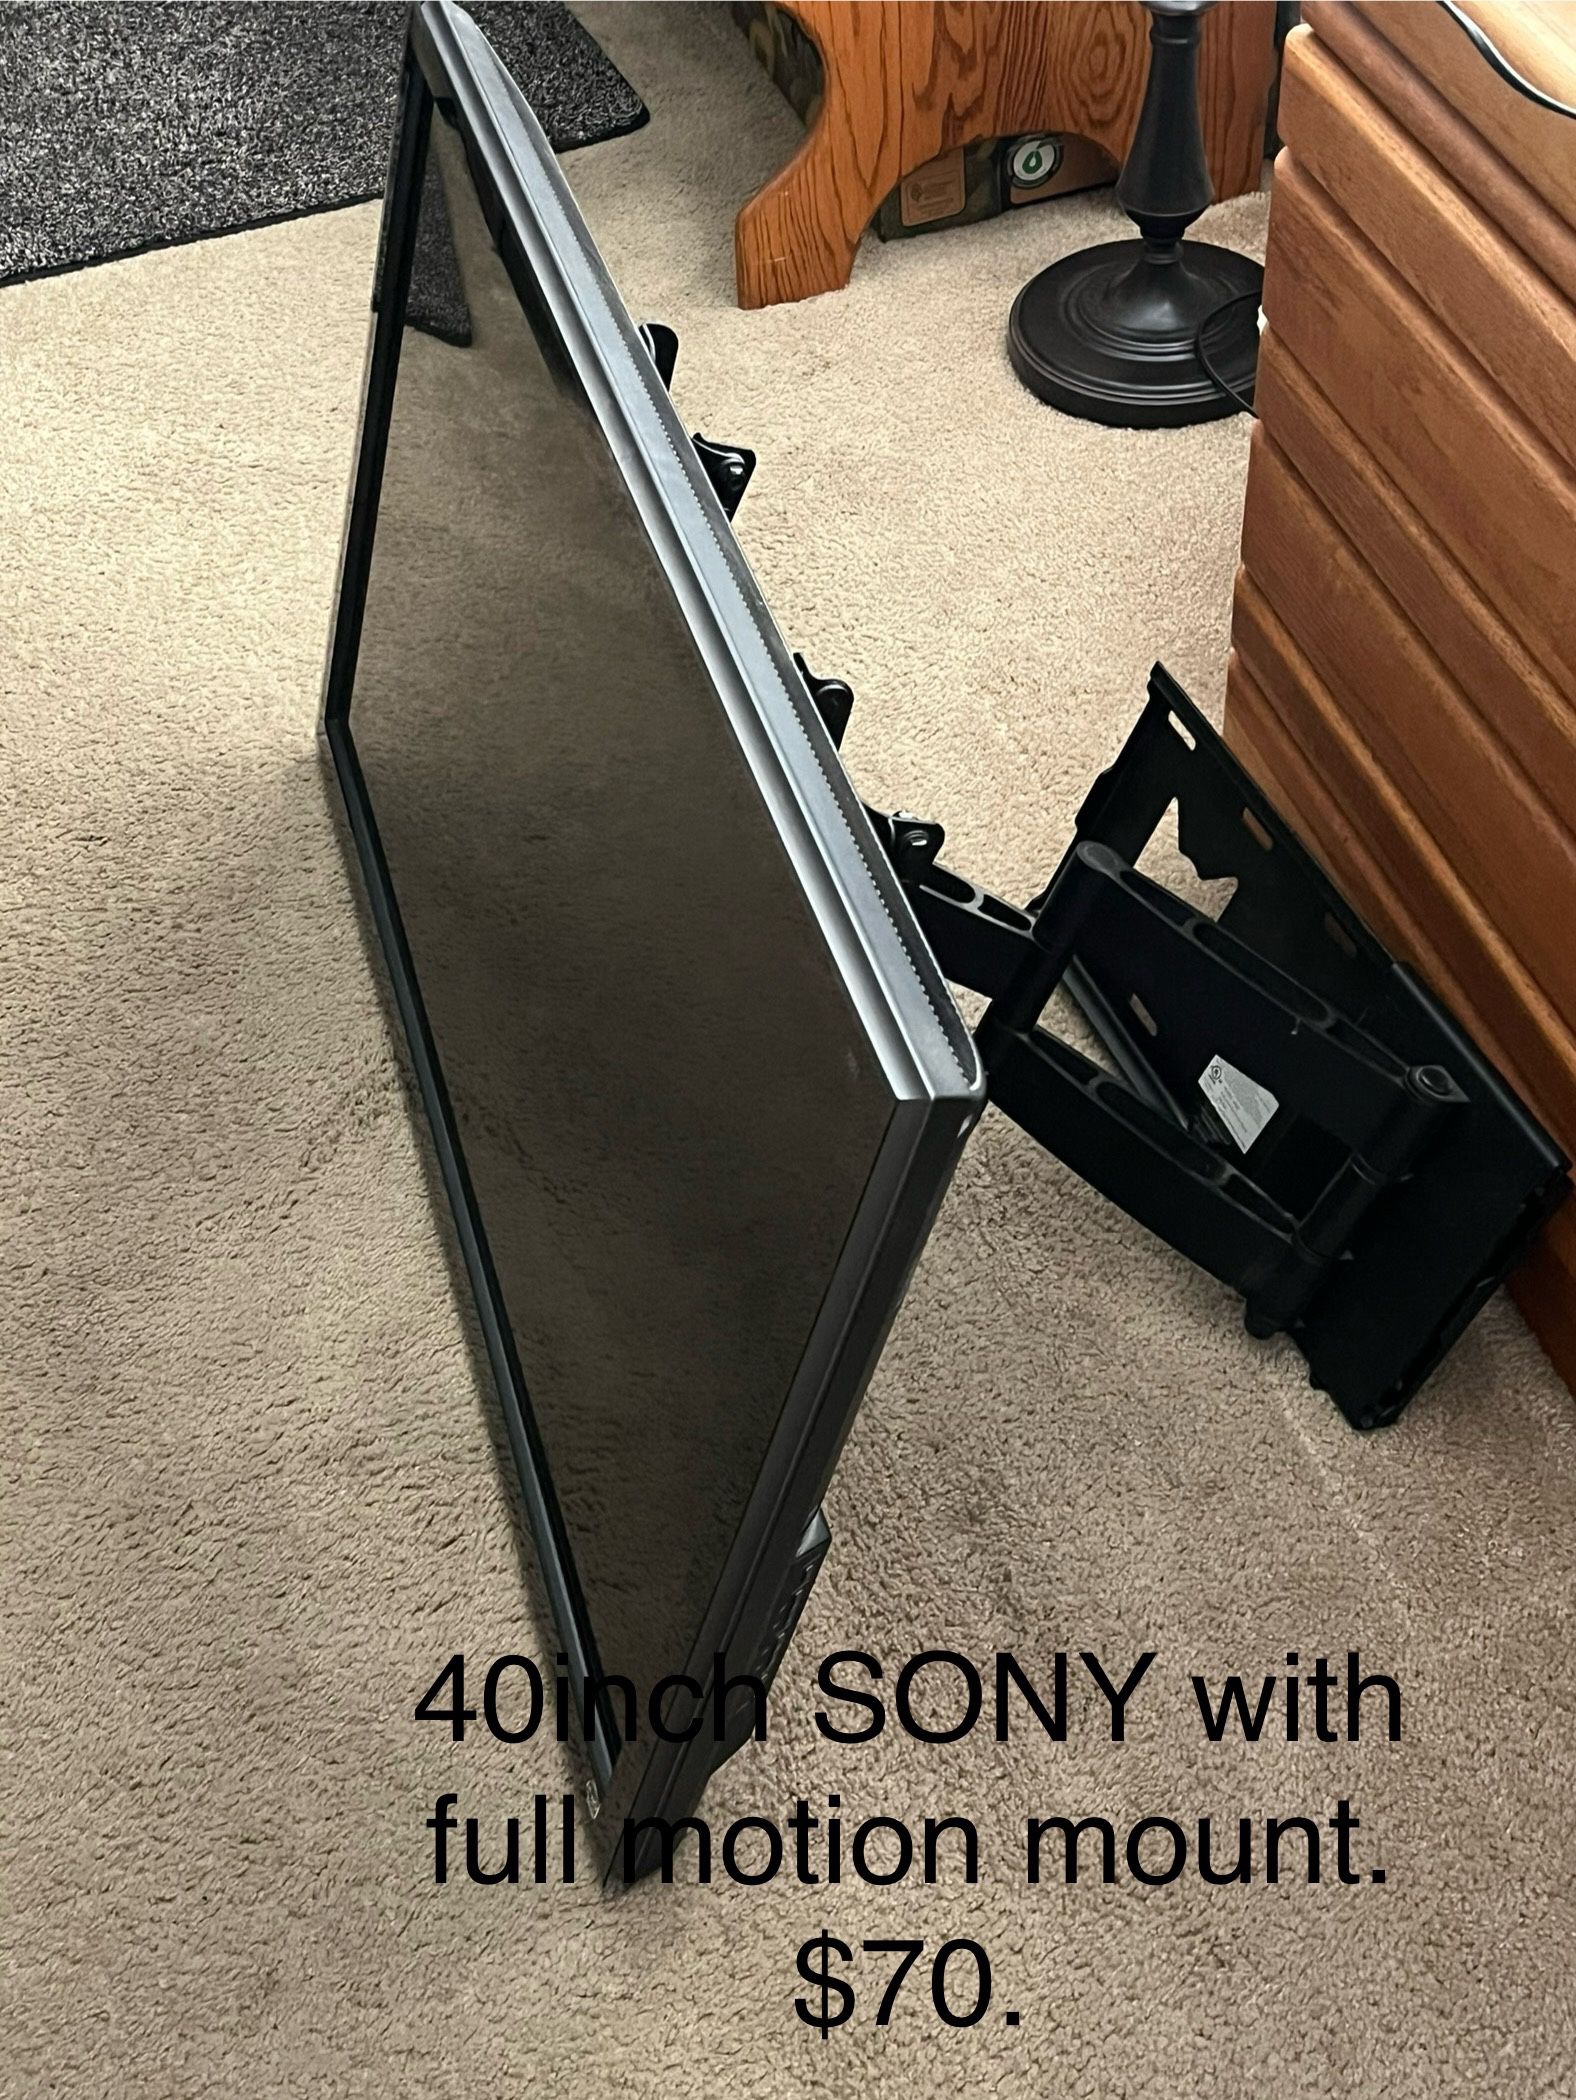 Sony Bravia TV 40 In. with wall mount